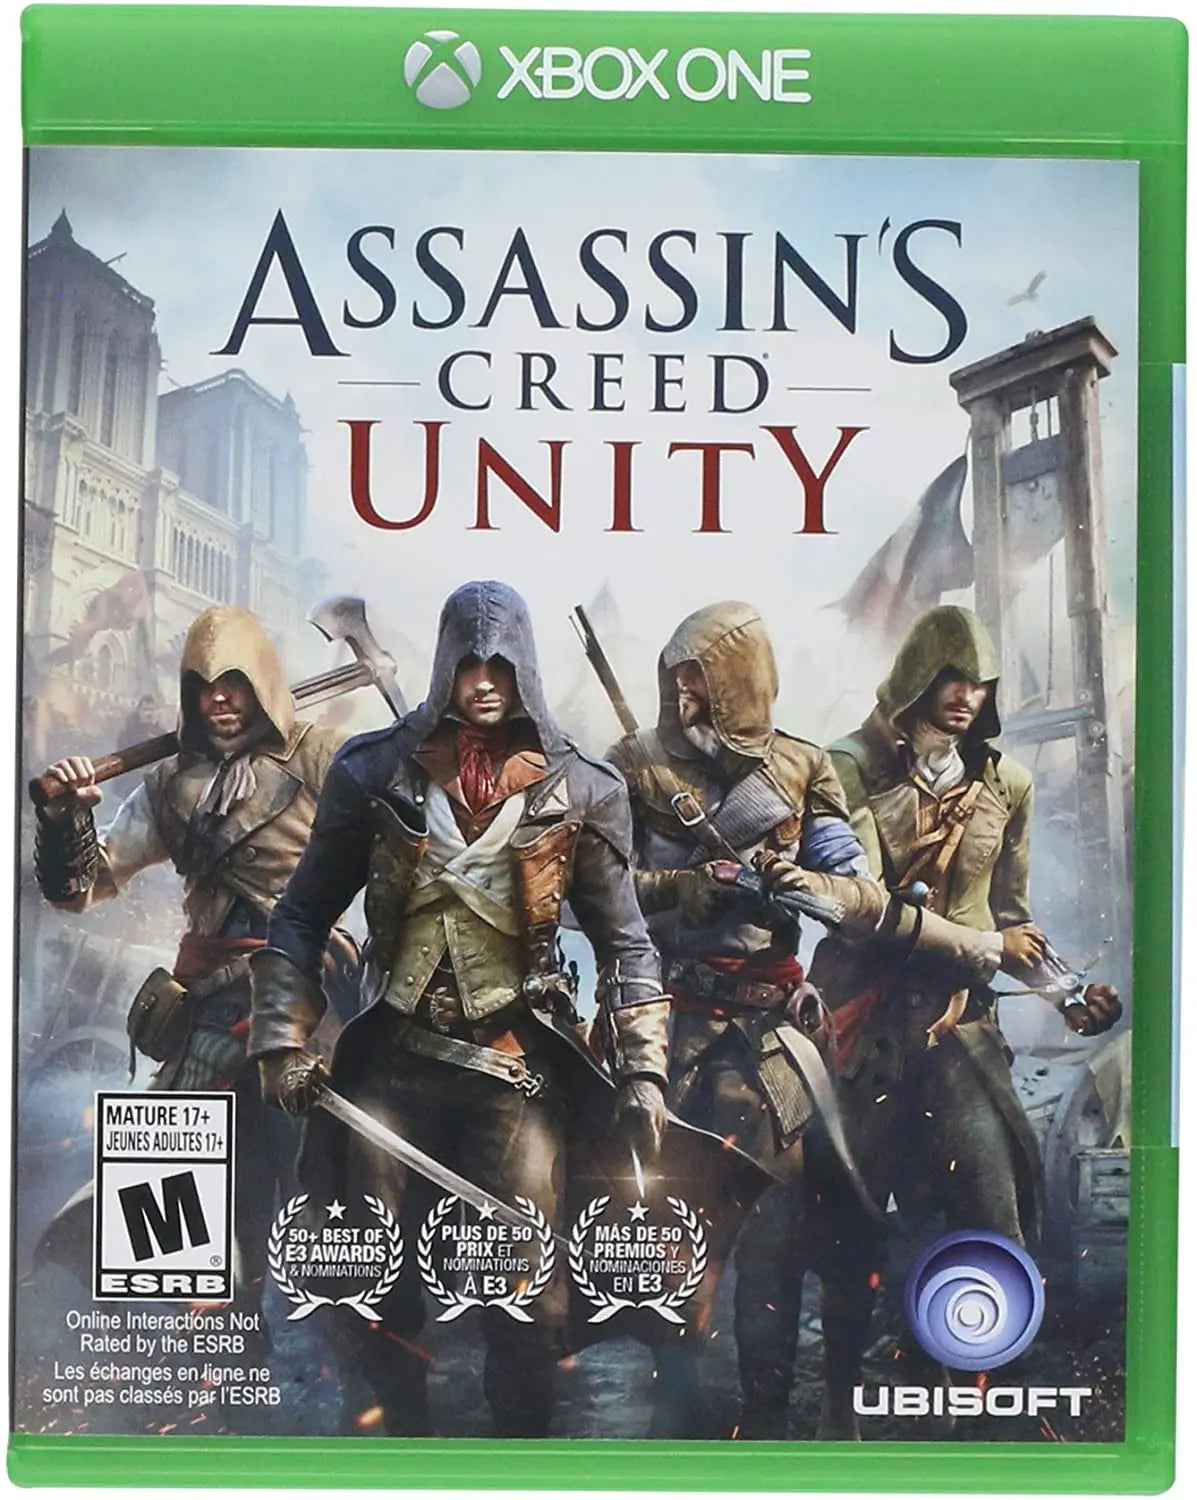 Assassin's Creed Unity - Xbox One - Standard Edition King Gaming